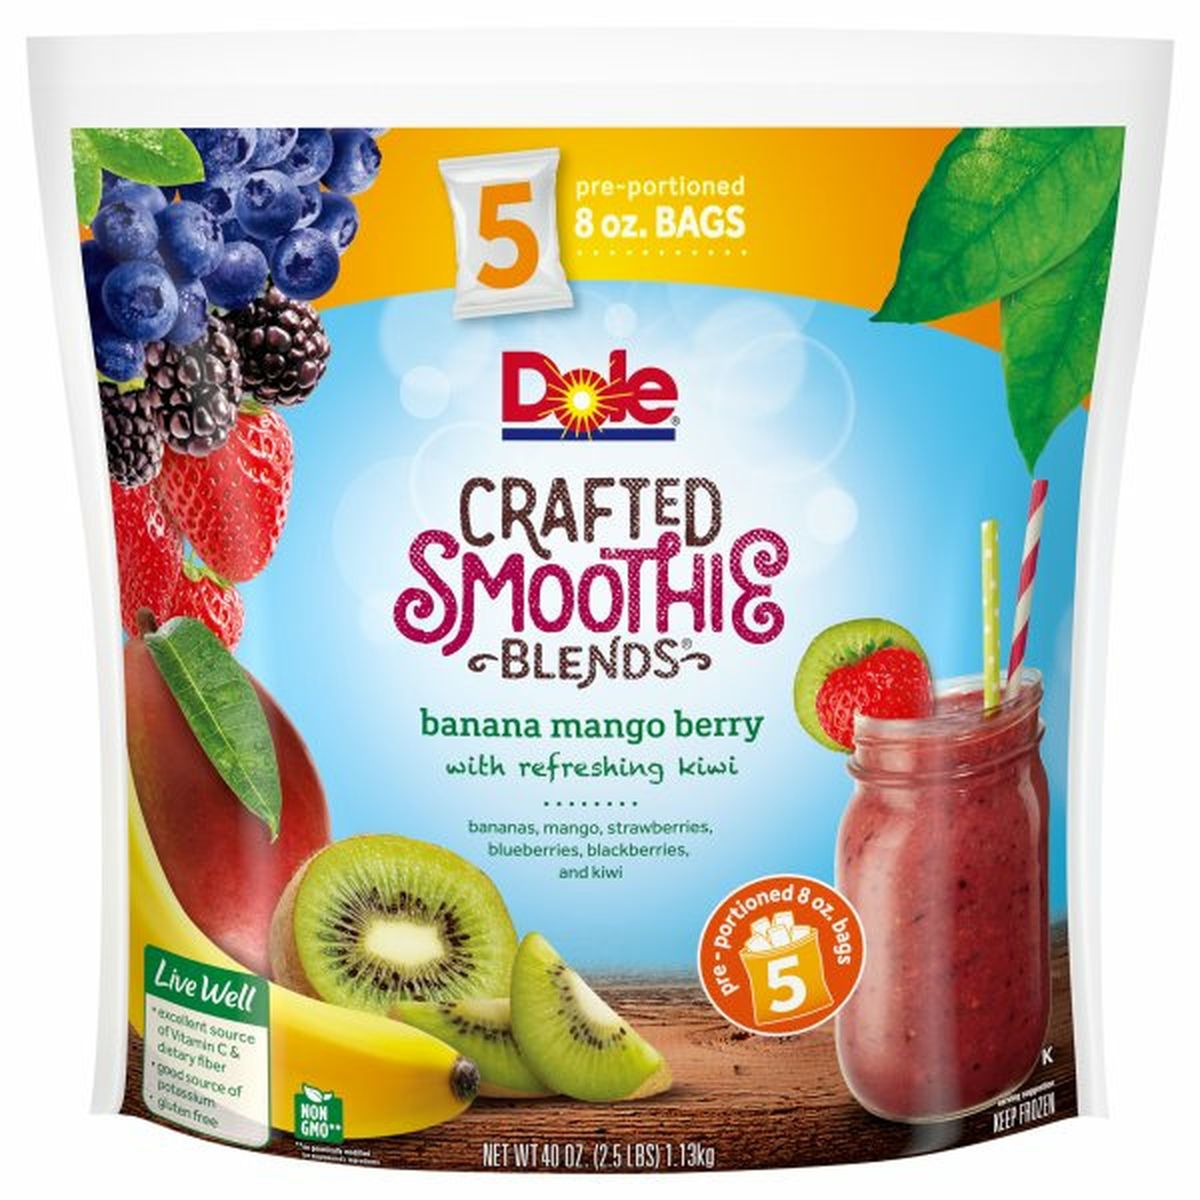 Calories in Dole Smoothie Blends, Crafted, Banana Mango Berry